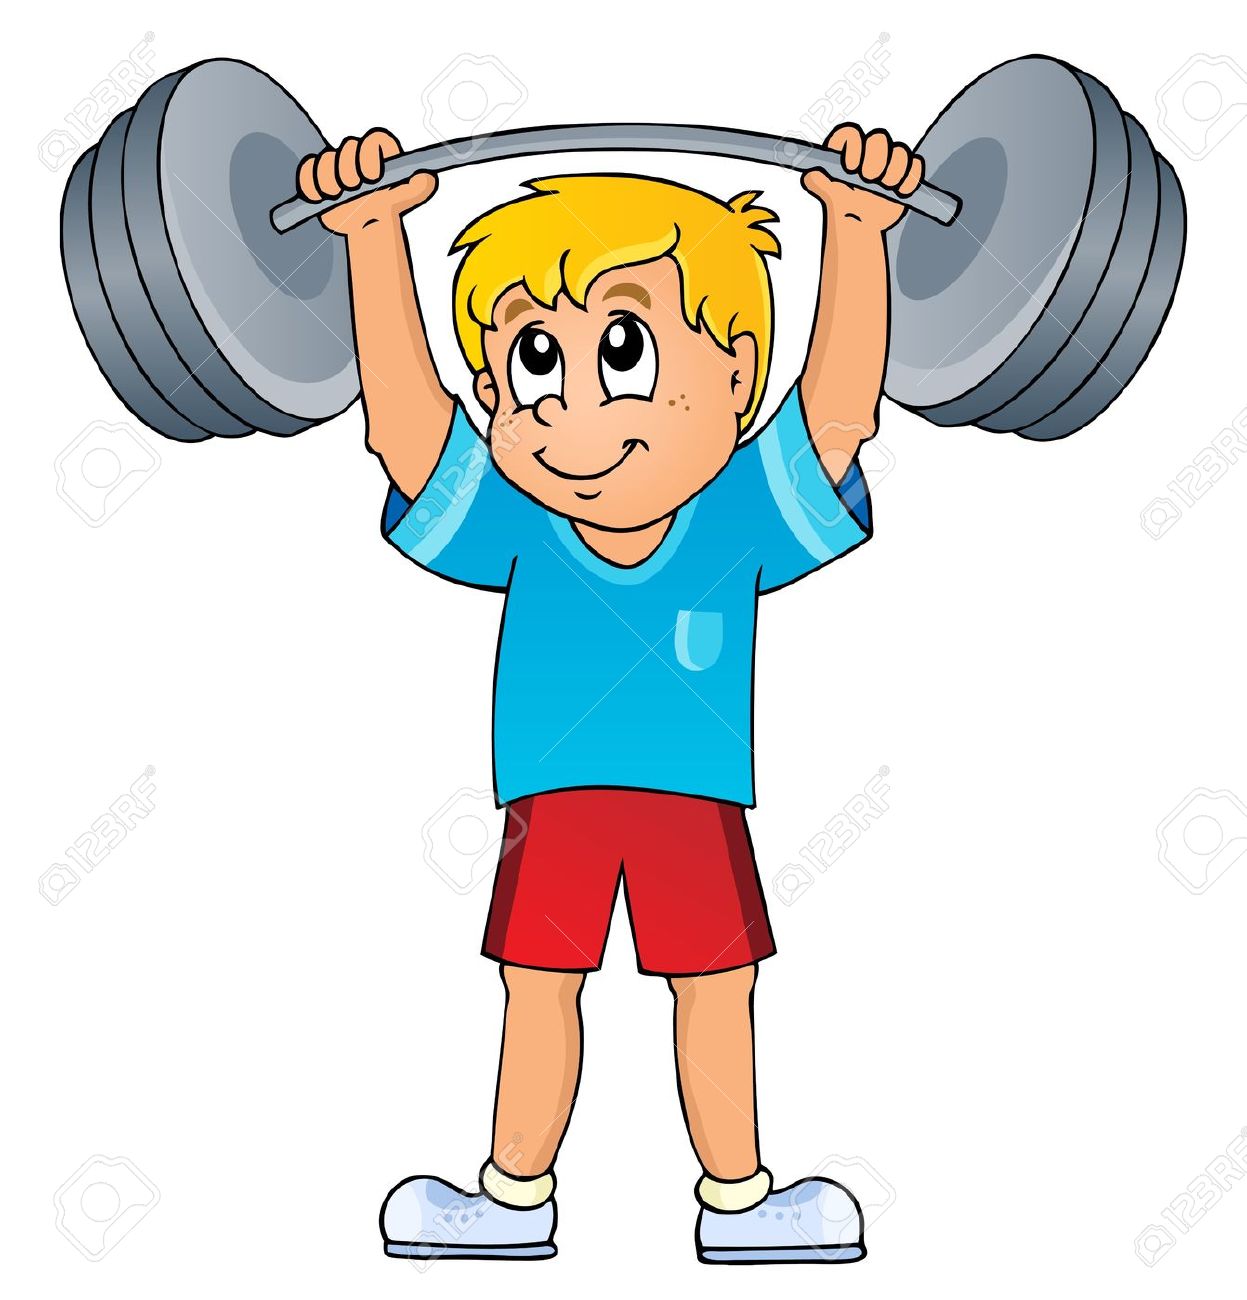 powerlifting clipart - photo #20